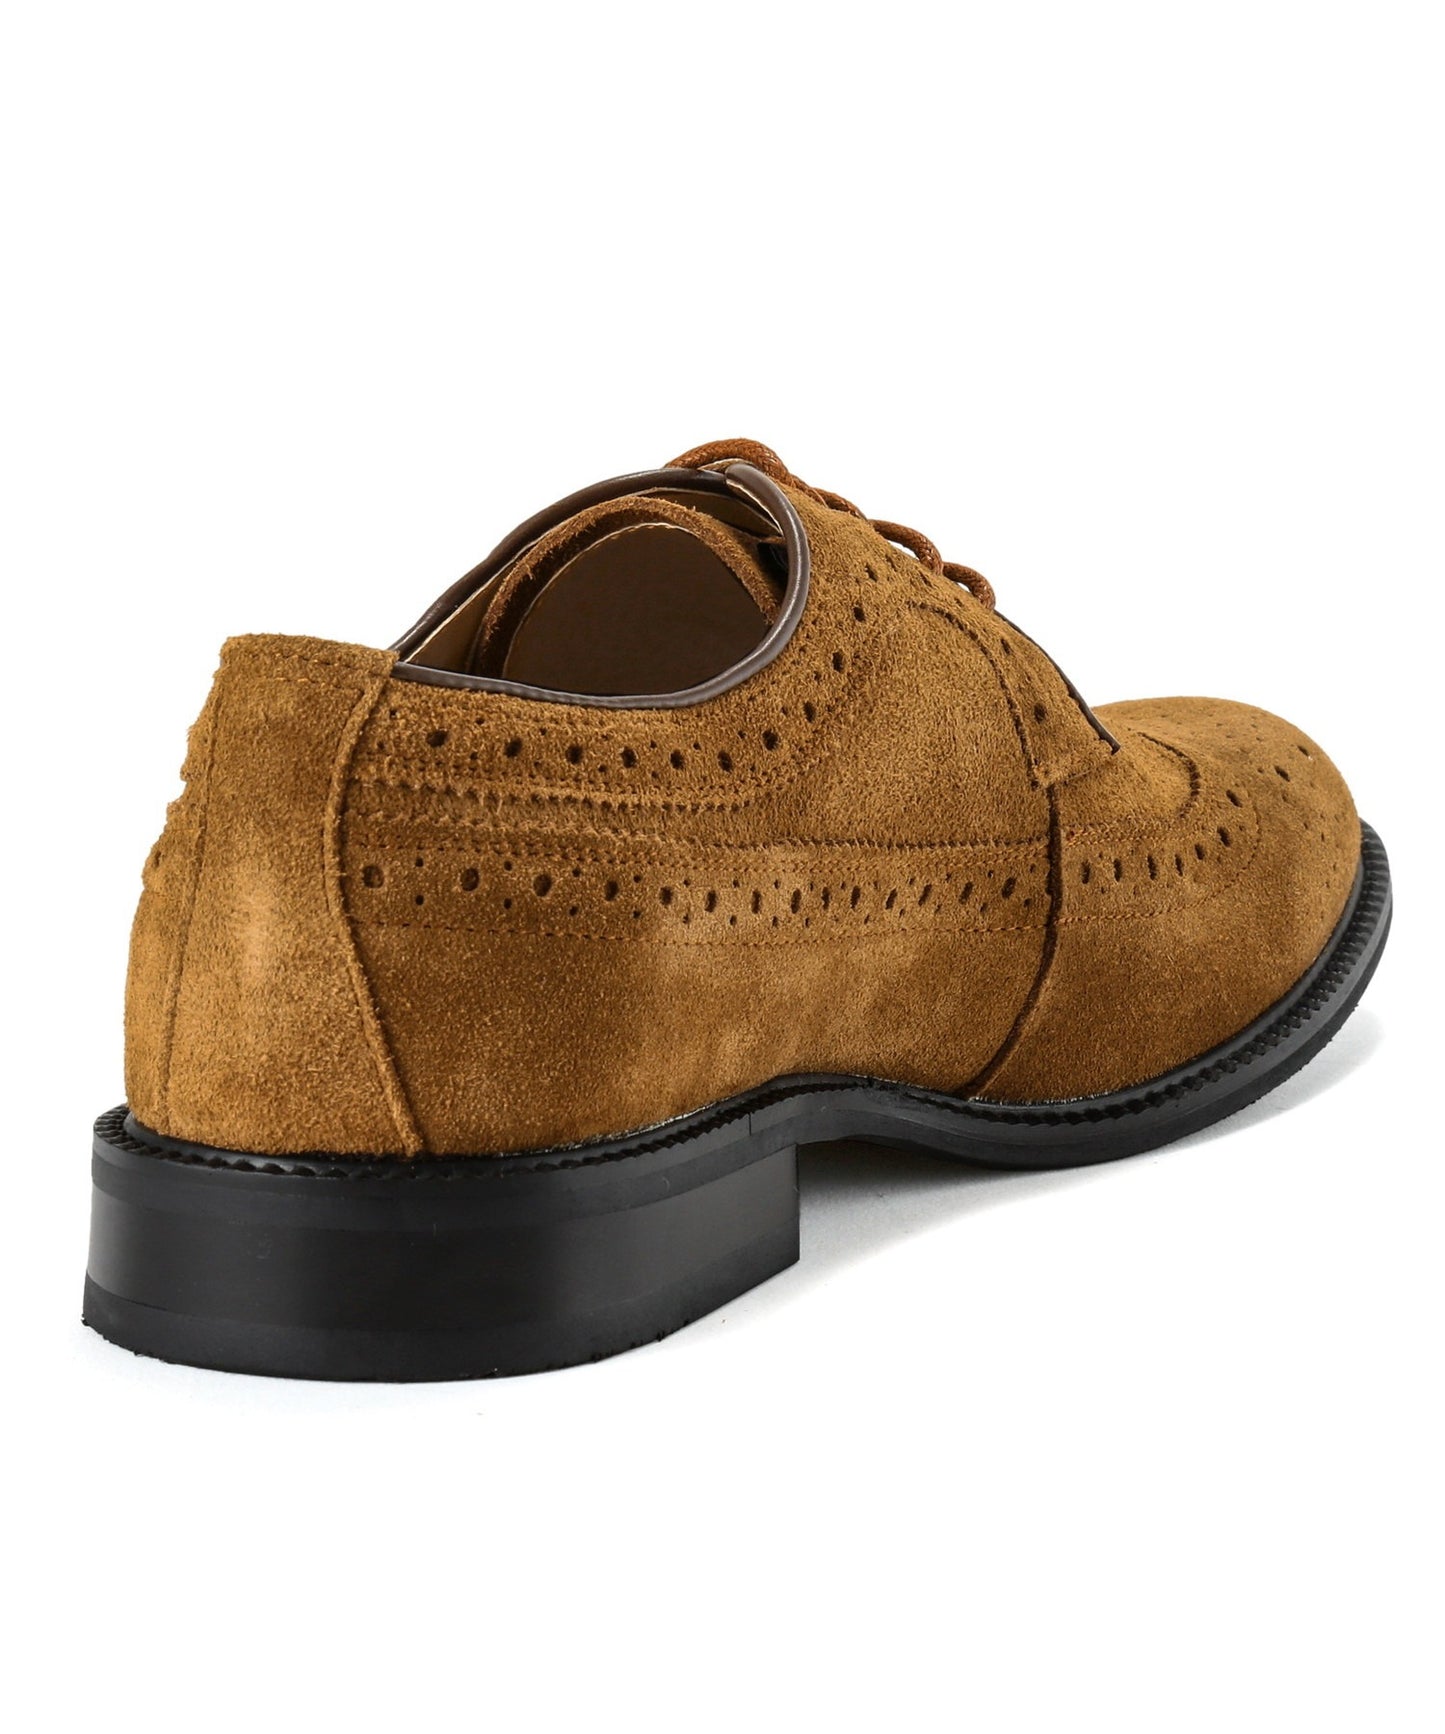 Outer feather full brogue suede shoes